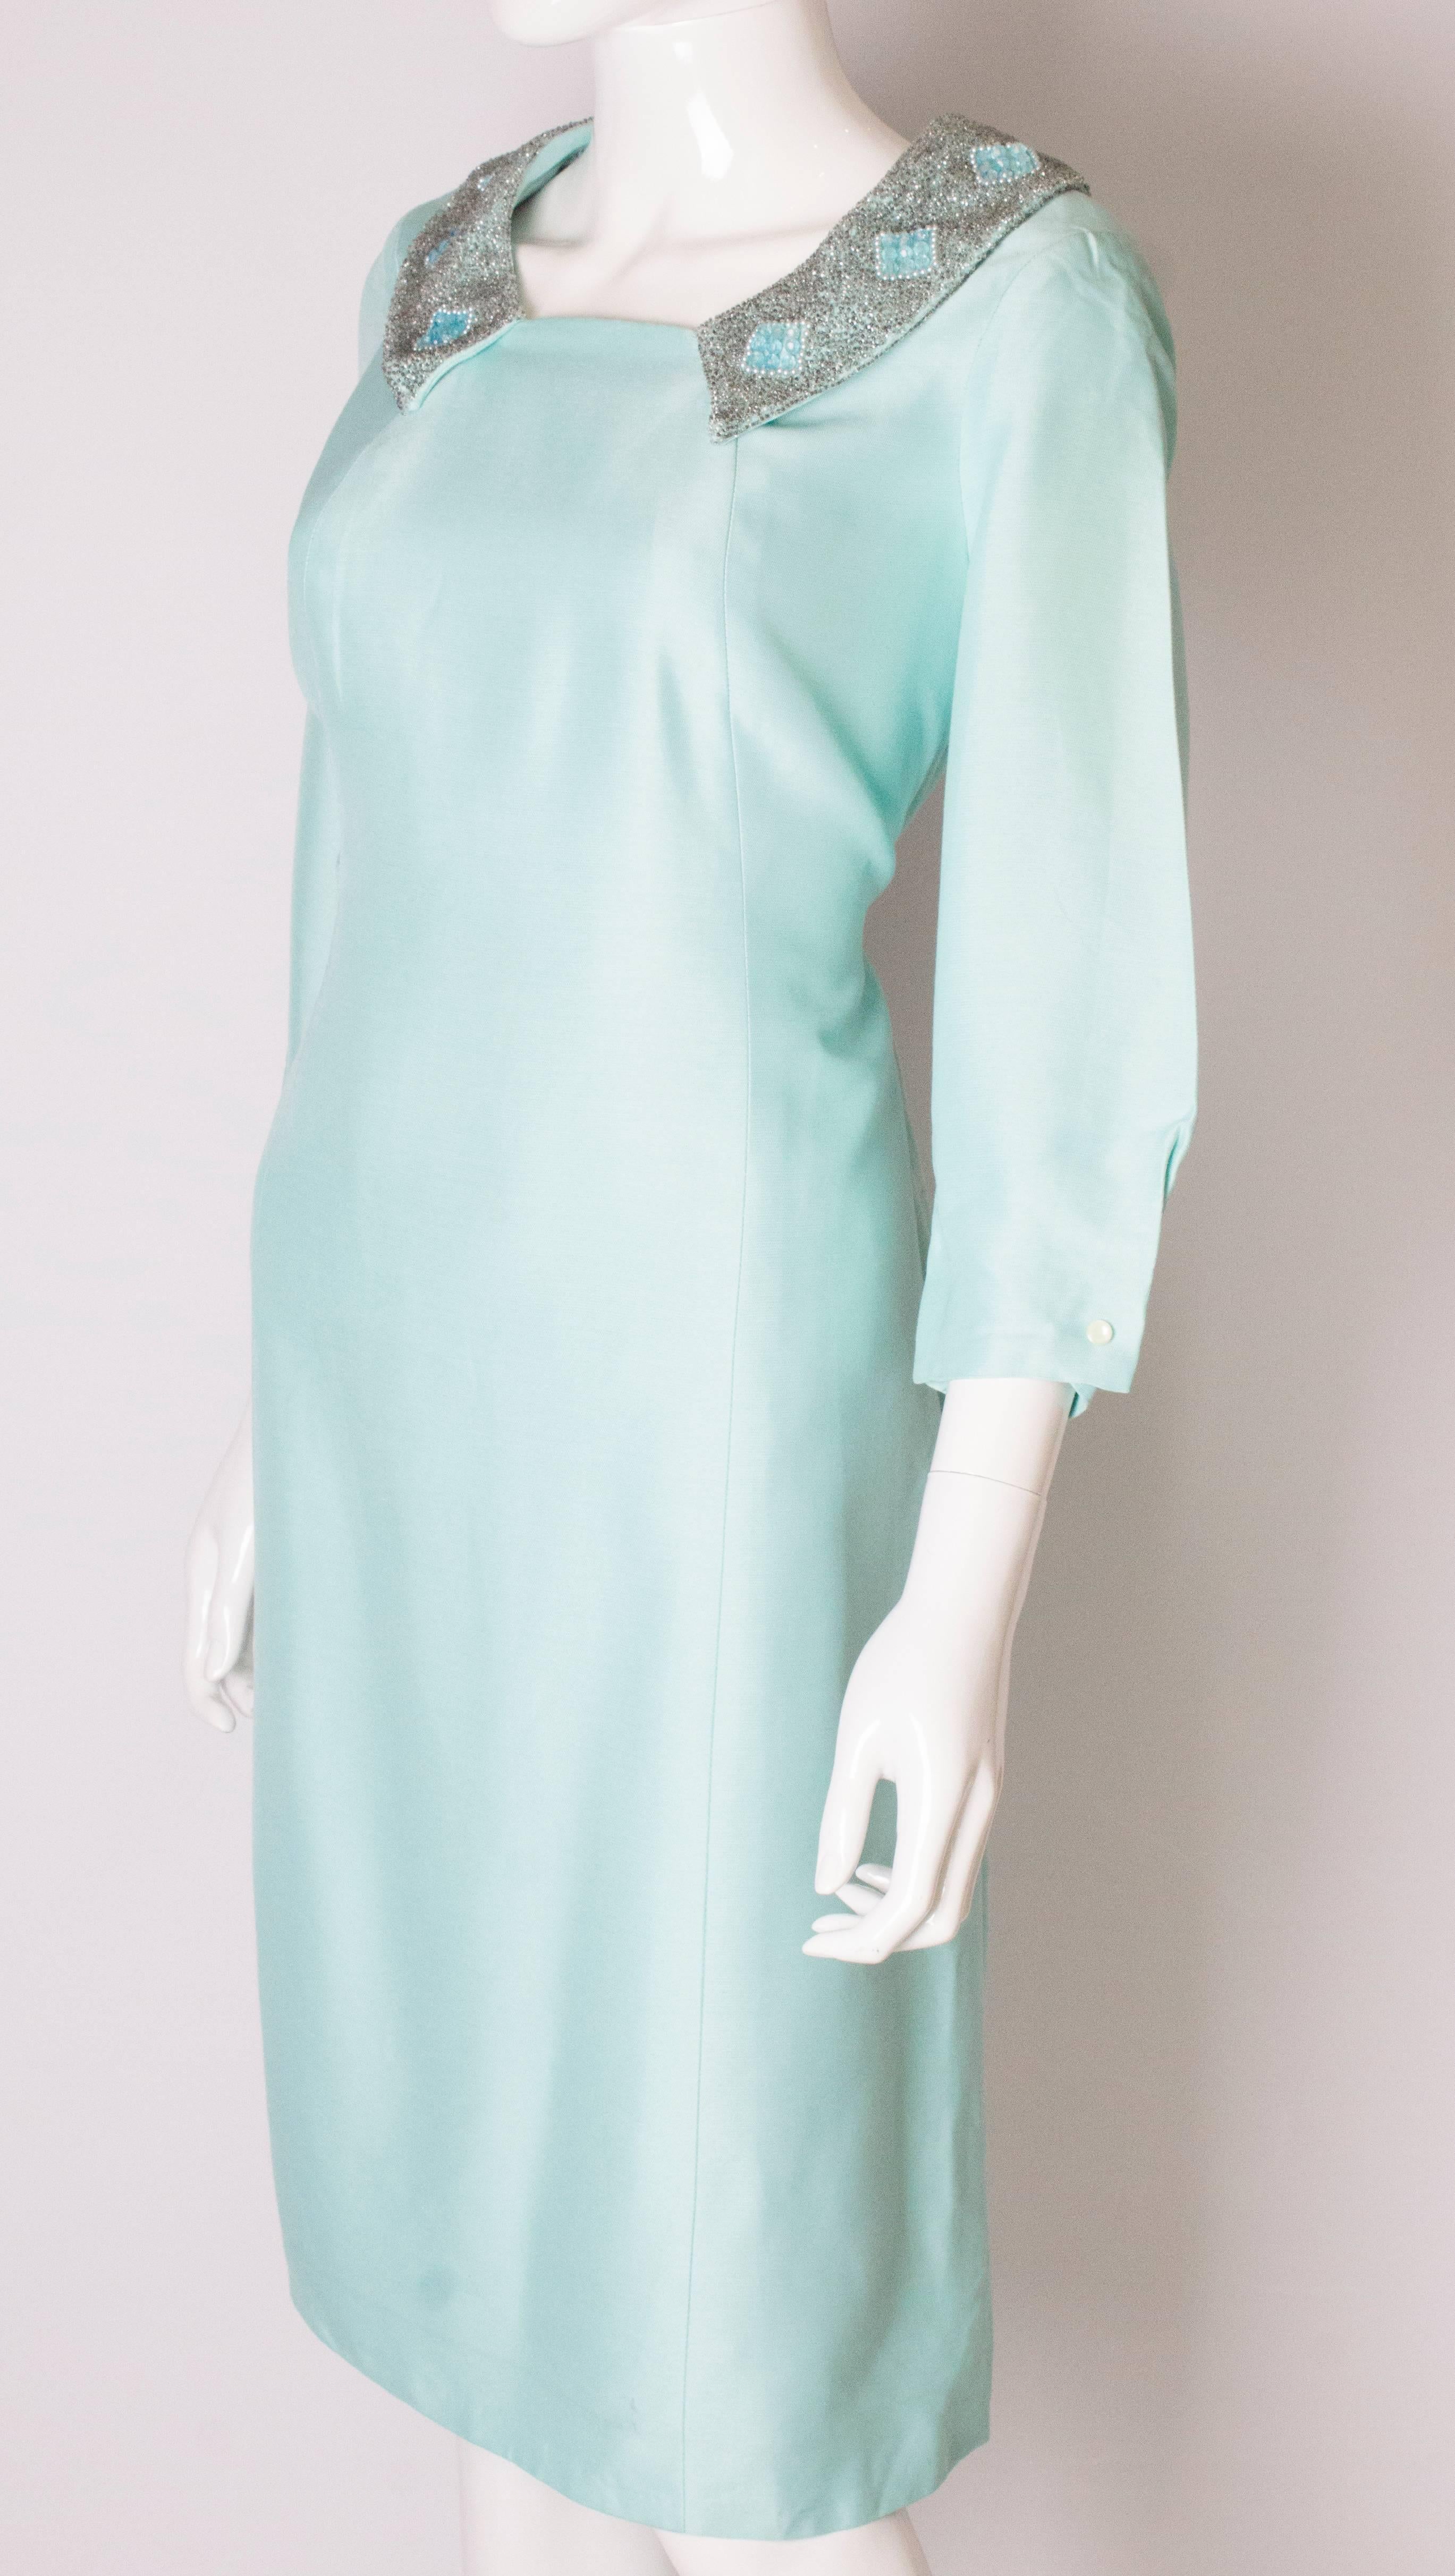 Pale Blue Vintage Dress by La Petite Francaise In Good Condition For Sale In London, GB